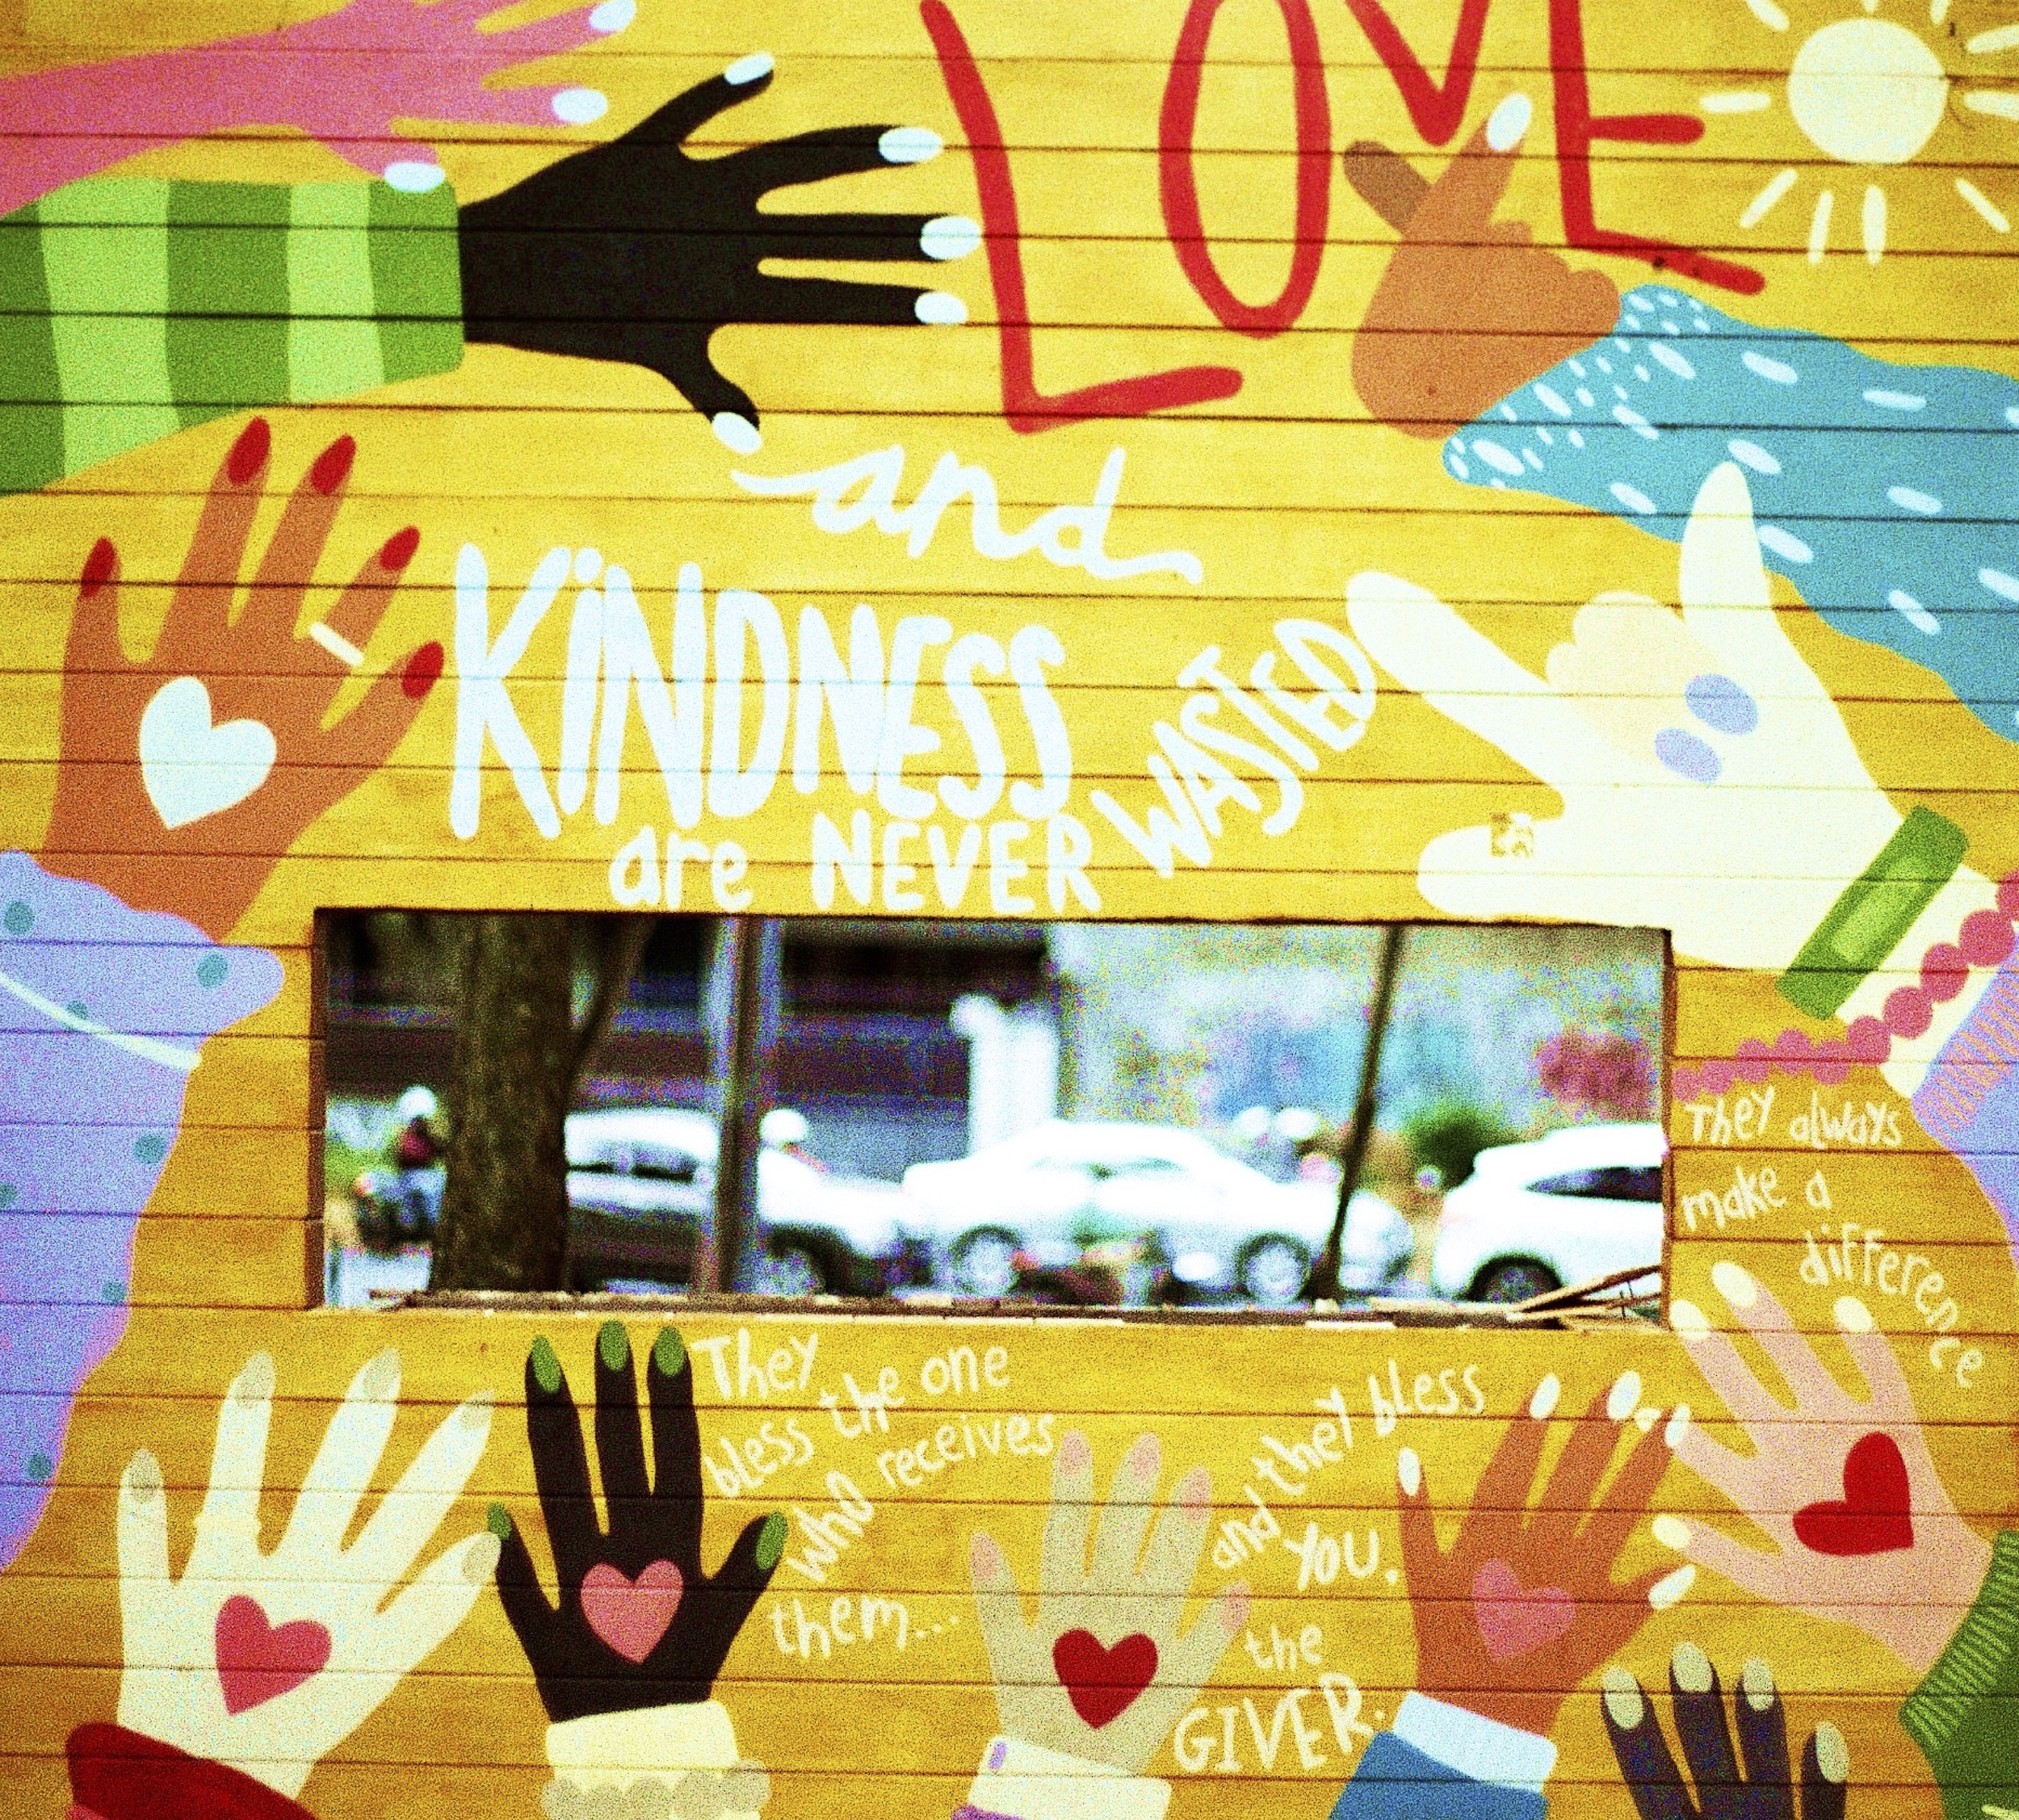 Featured Image for “The Power of Loving Kindness”